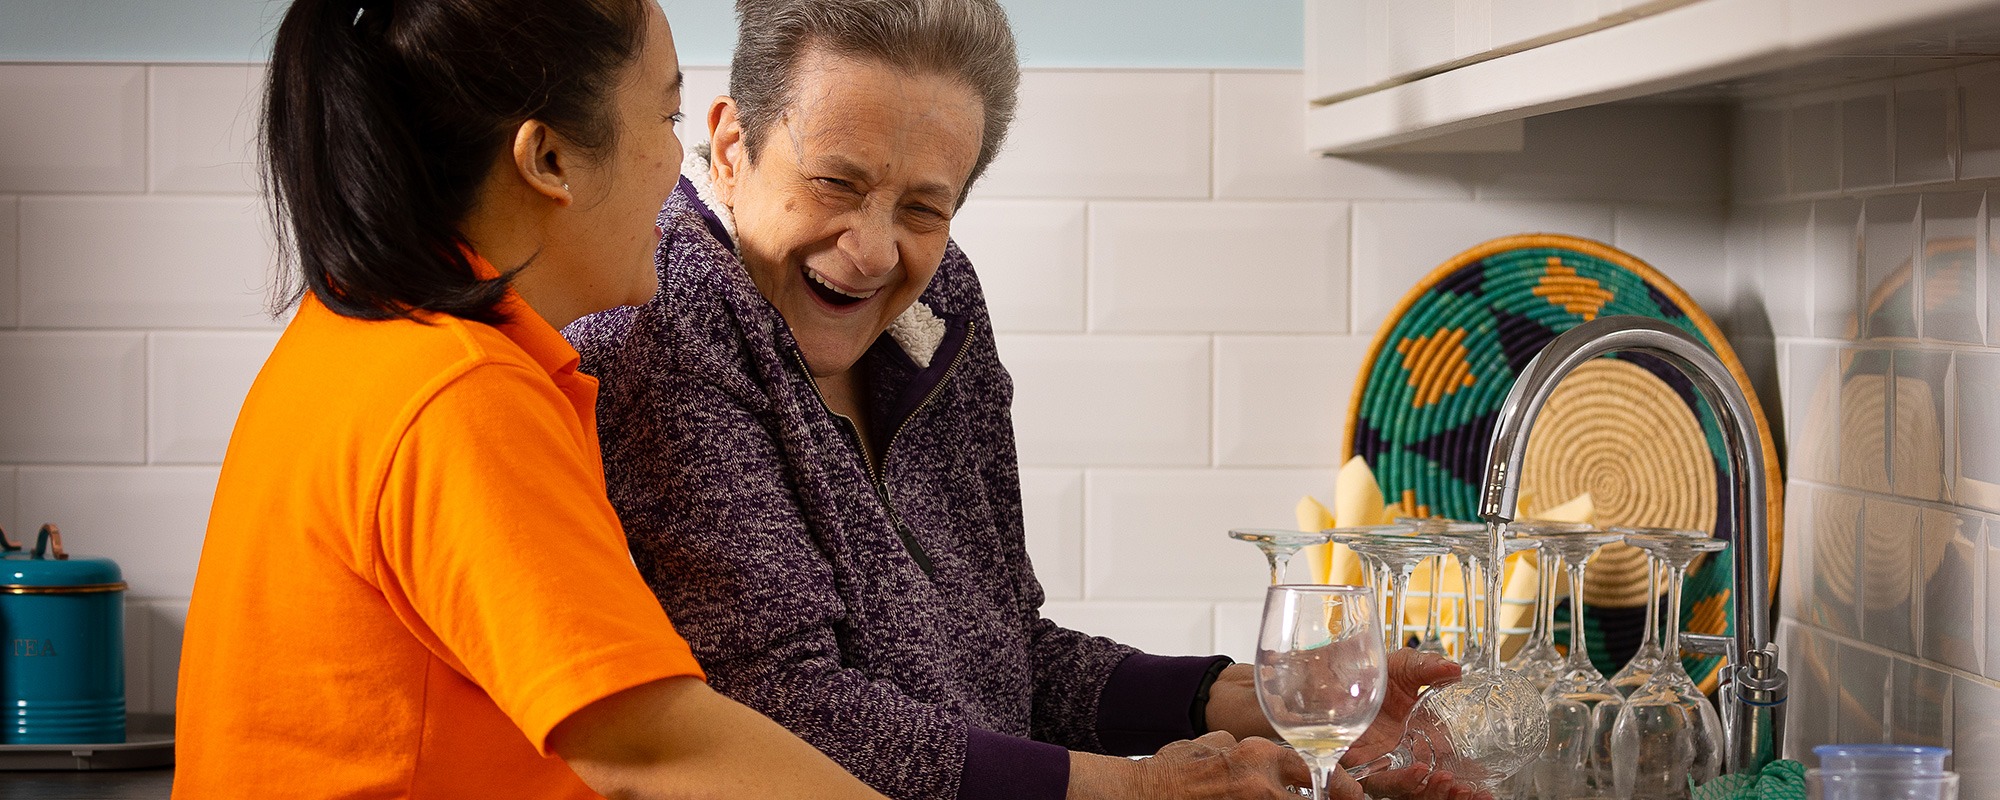 Resident at Ashley Grange Does Washing Up Laughing With Carer